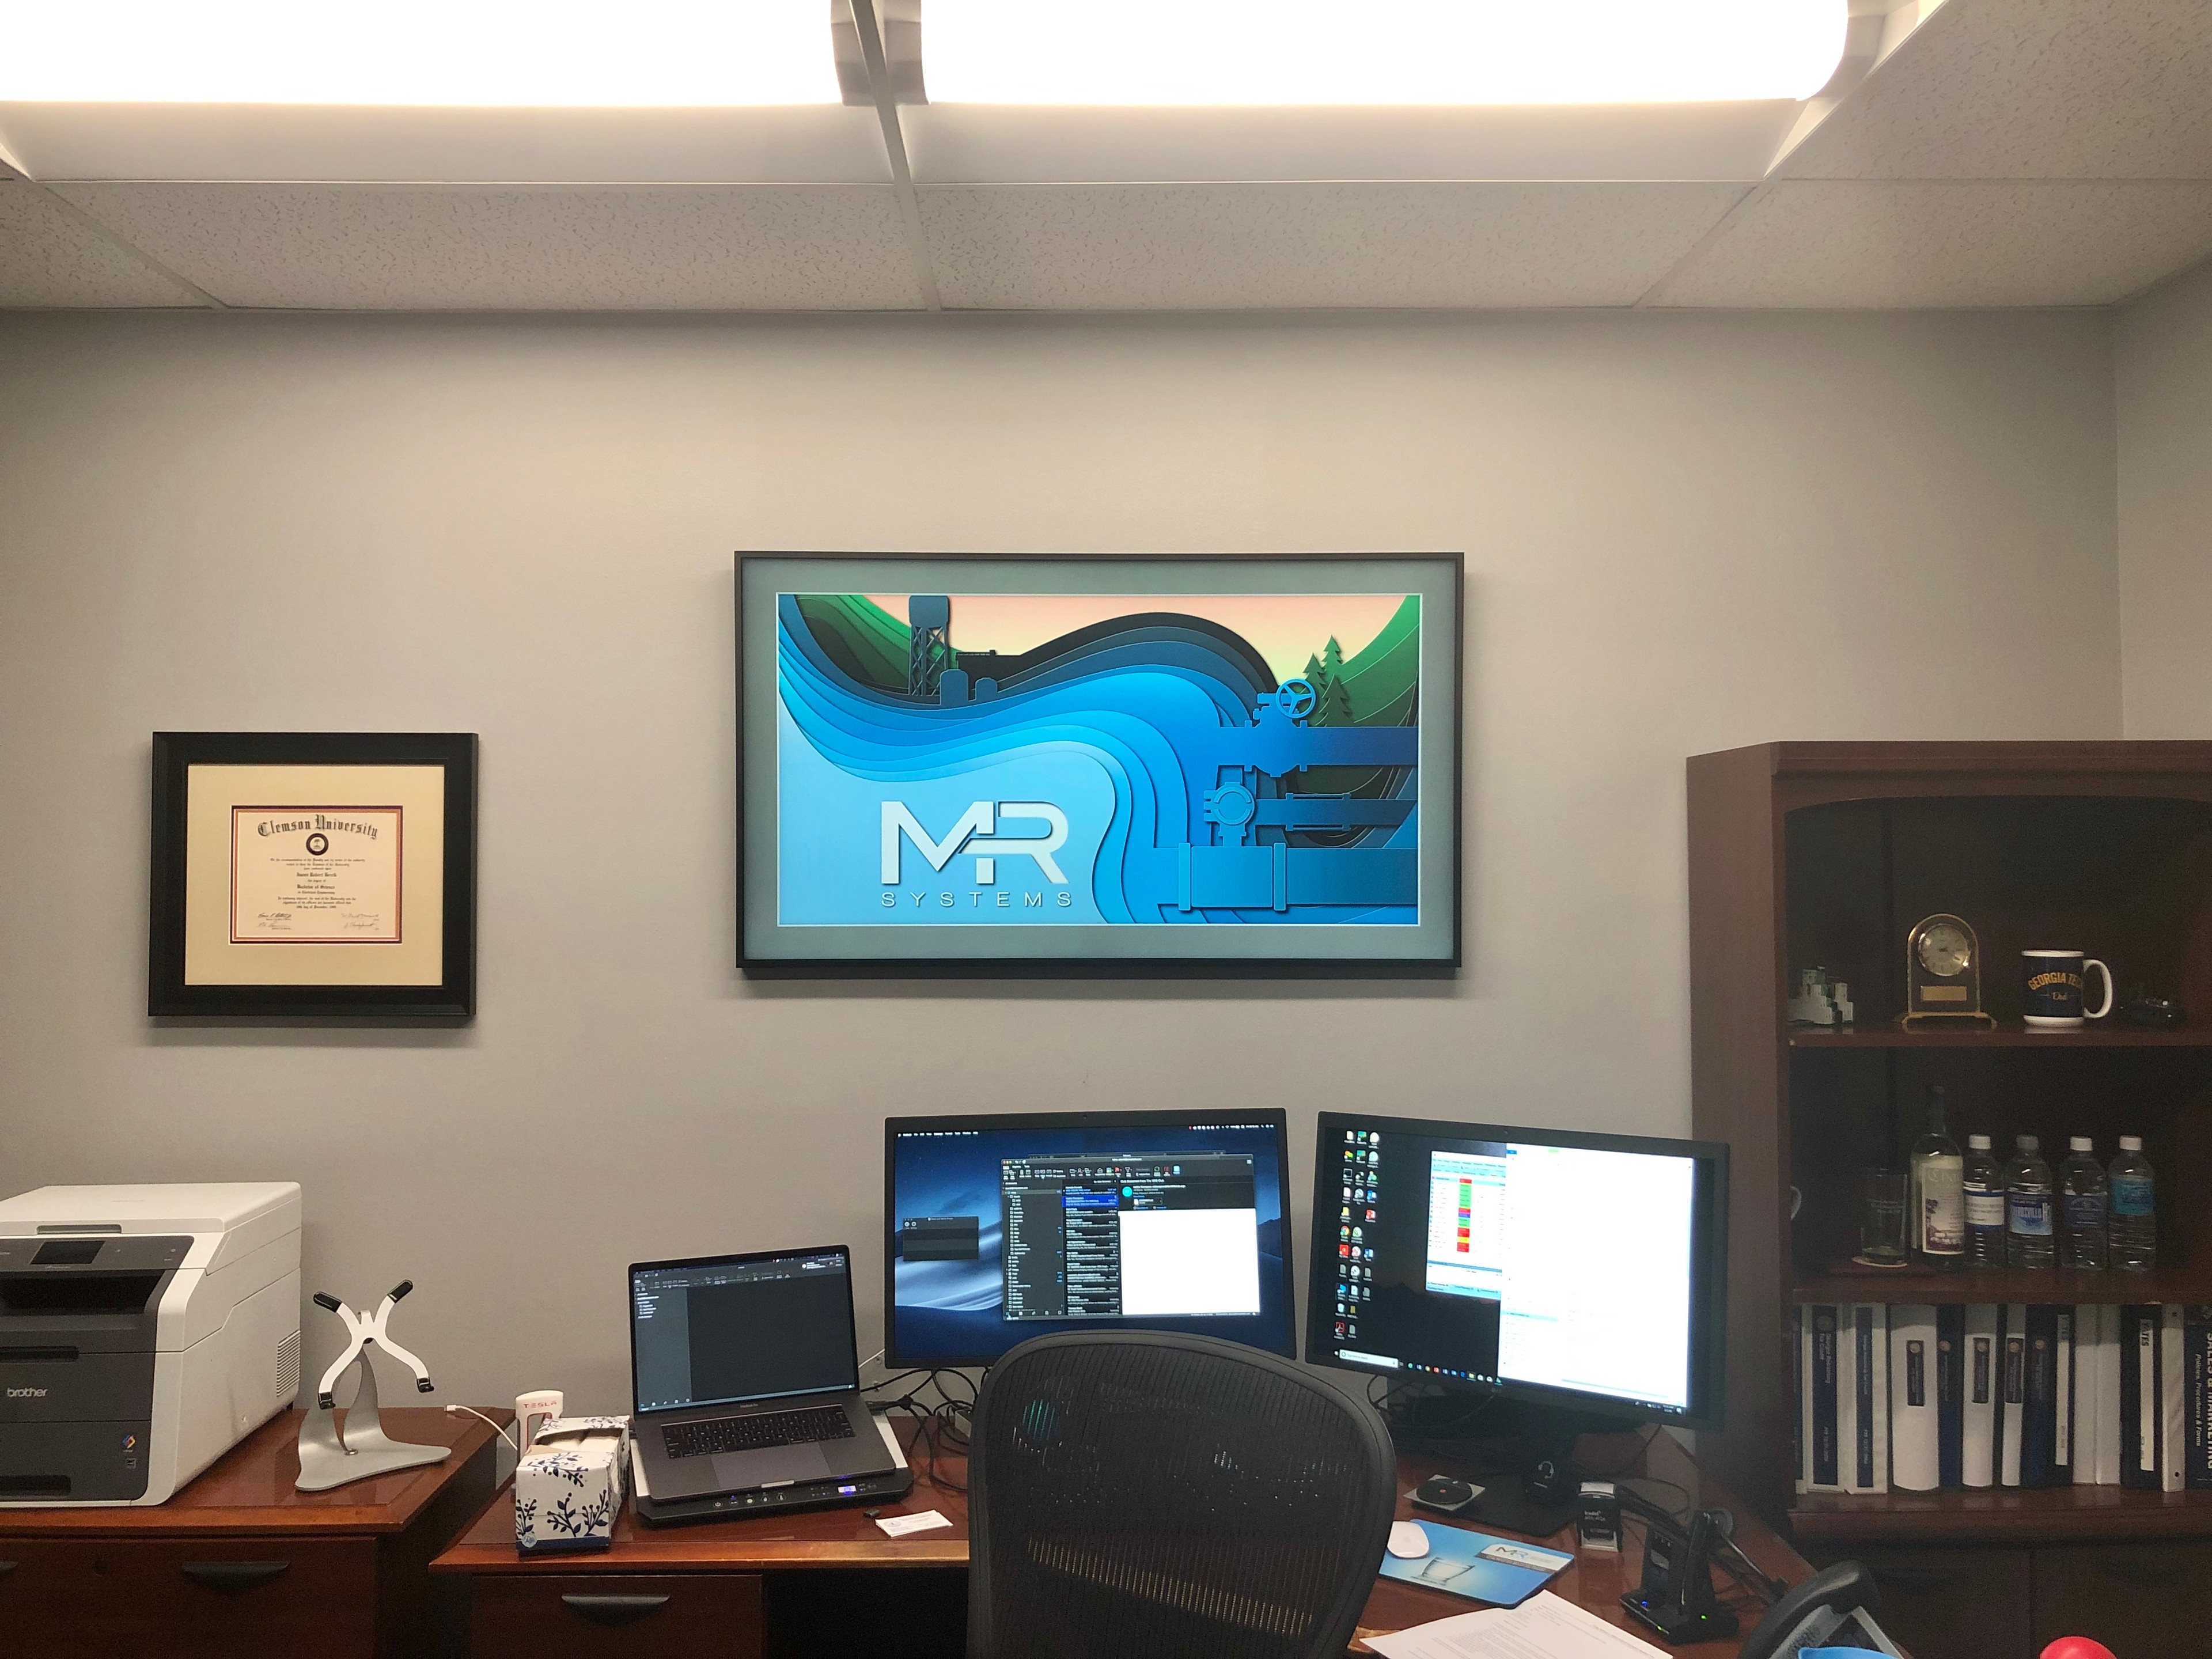 The president of the company liked the initial concept so much he put it on the digital picture frame in his office. How’s that for an endorsement?